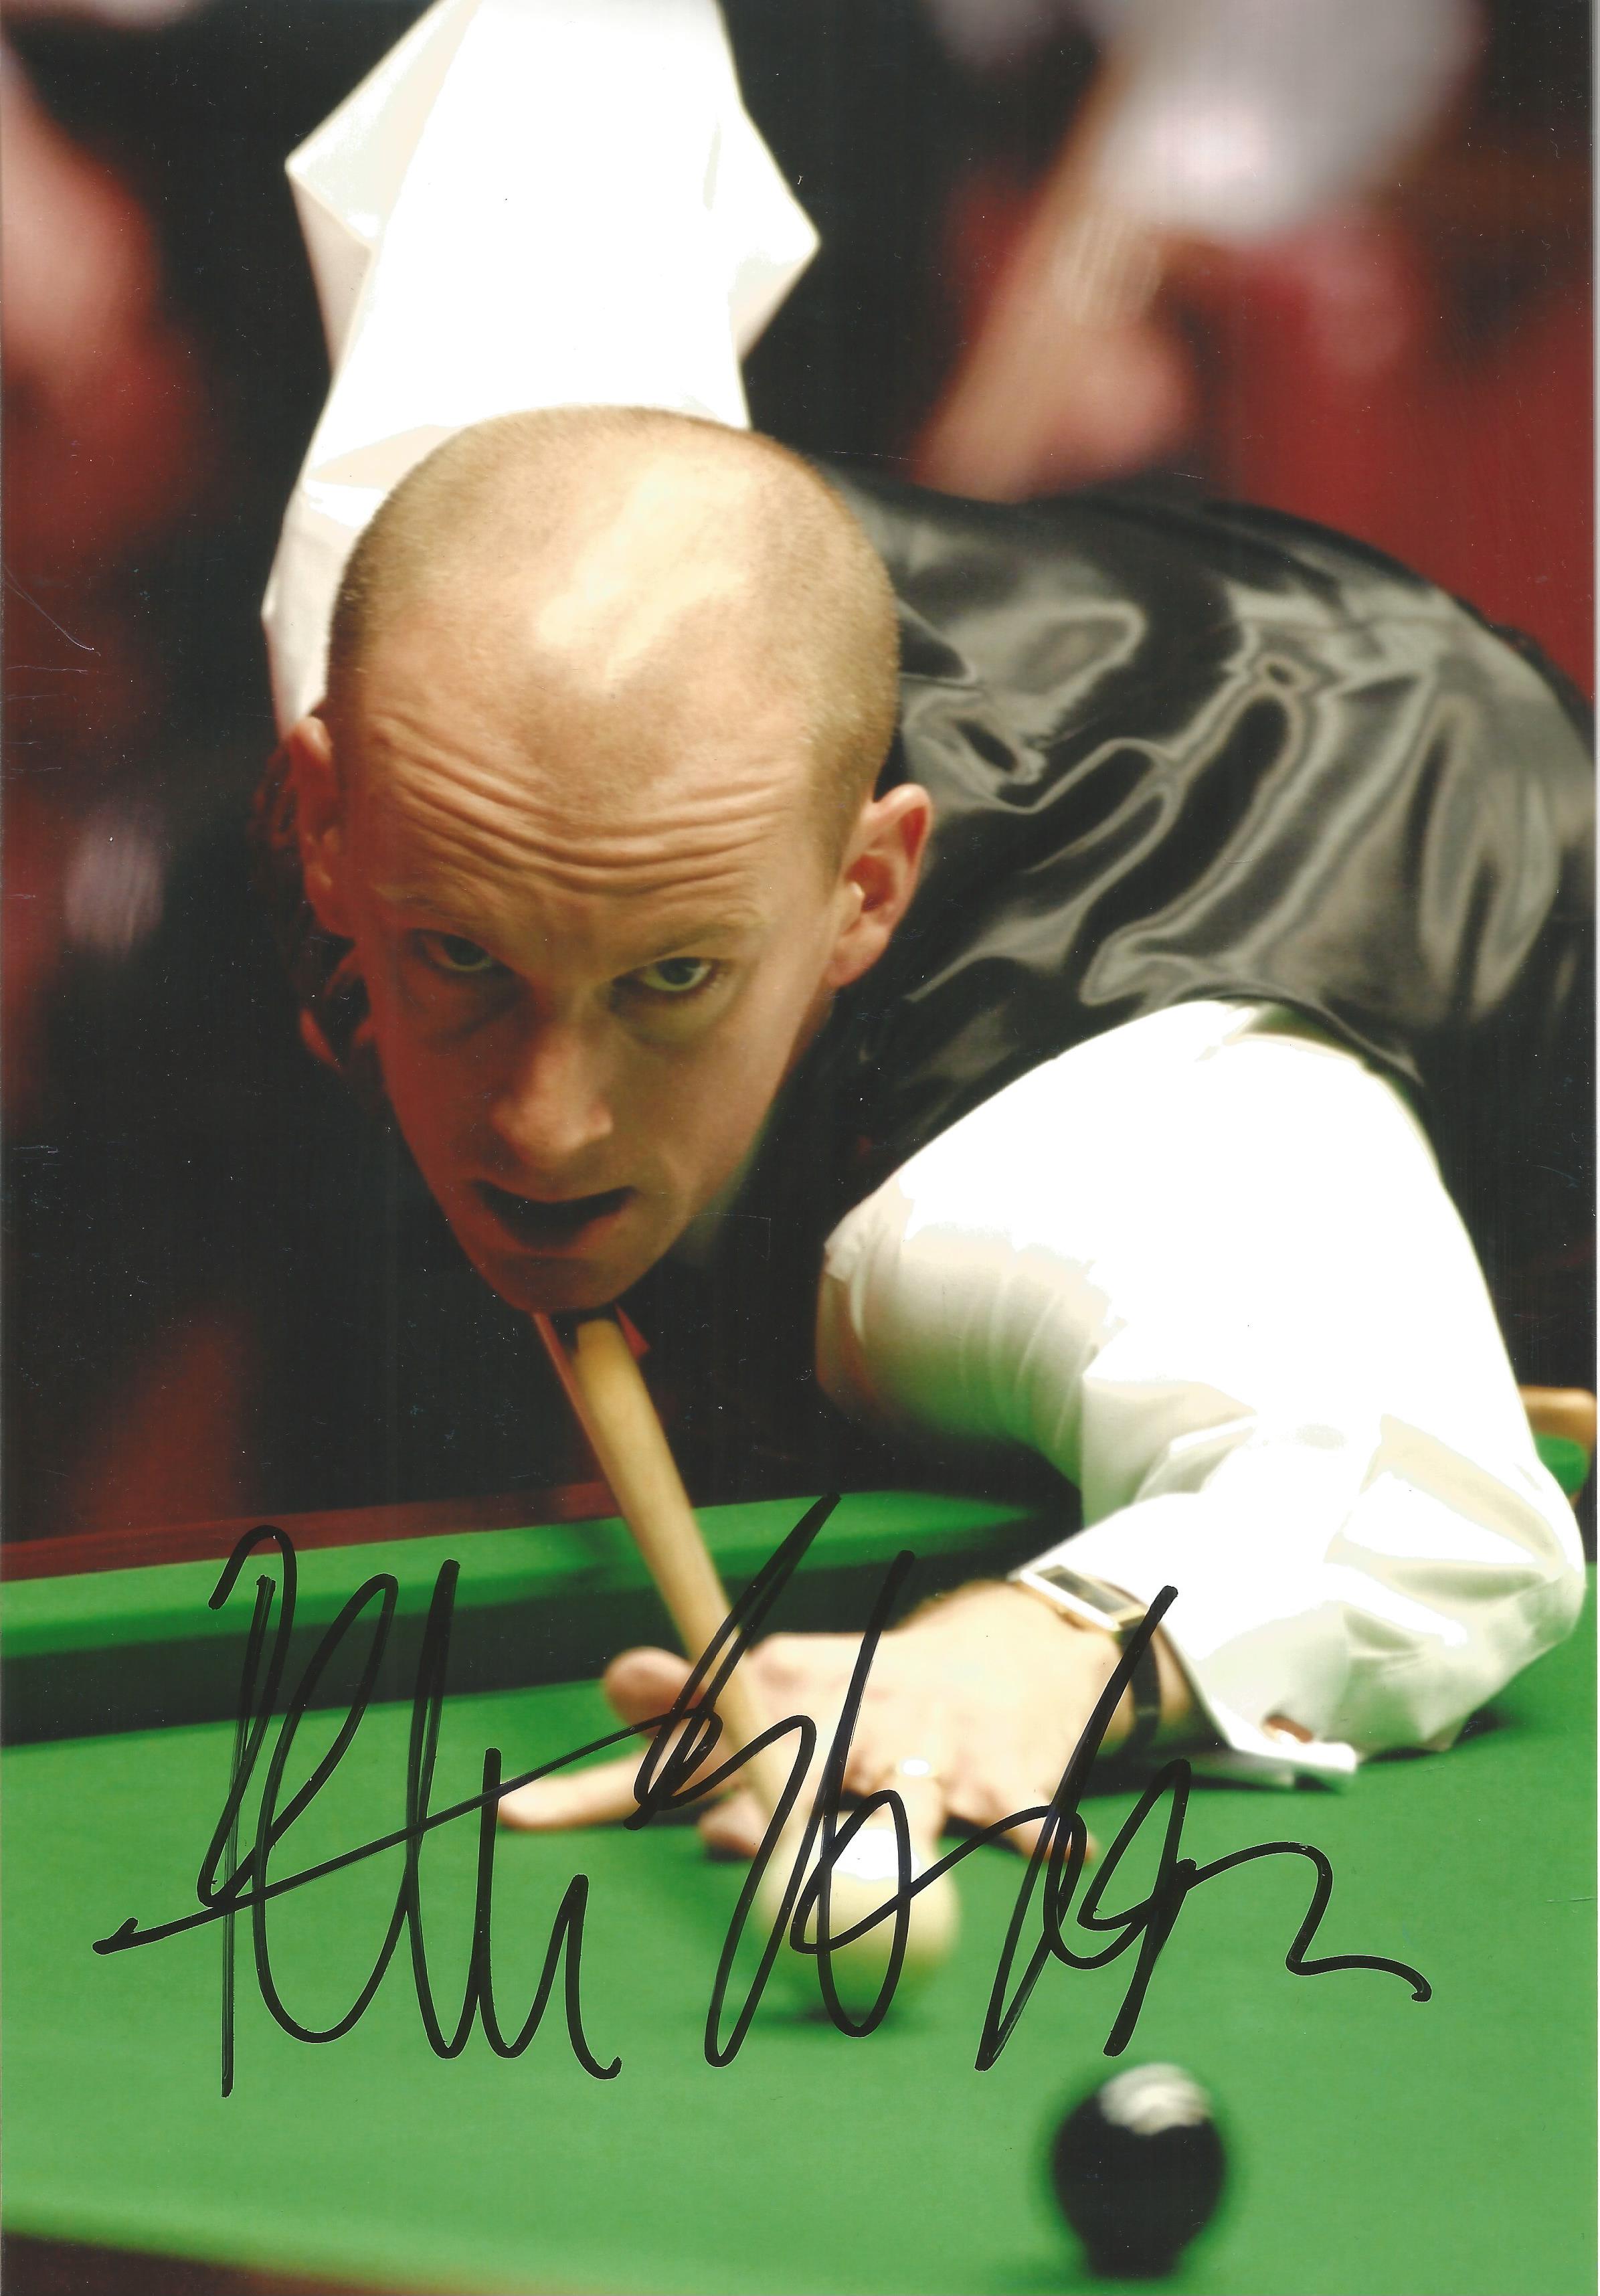 Peter Ebdon Signed Snooker 8x12 Photo. Good Condition. All autographs are genuine hand signed and